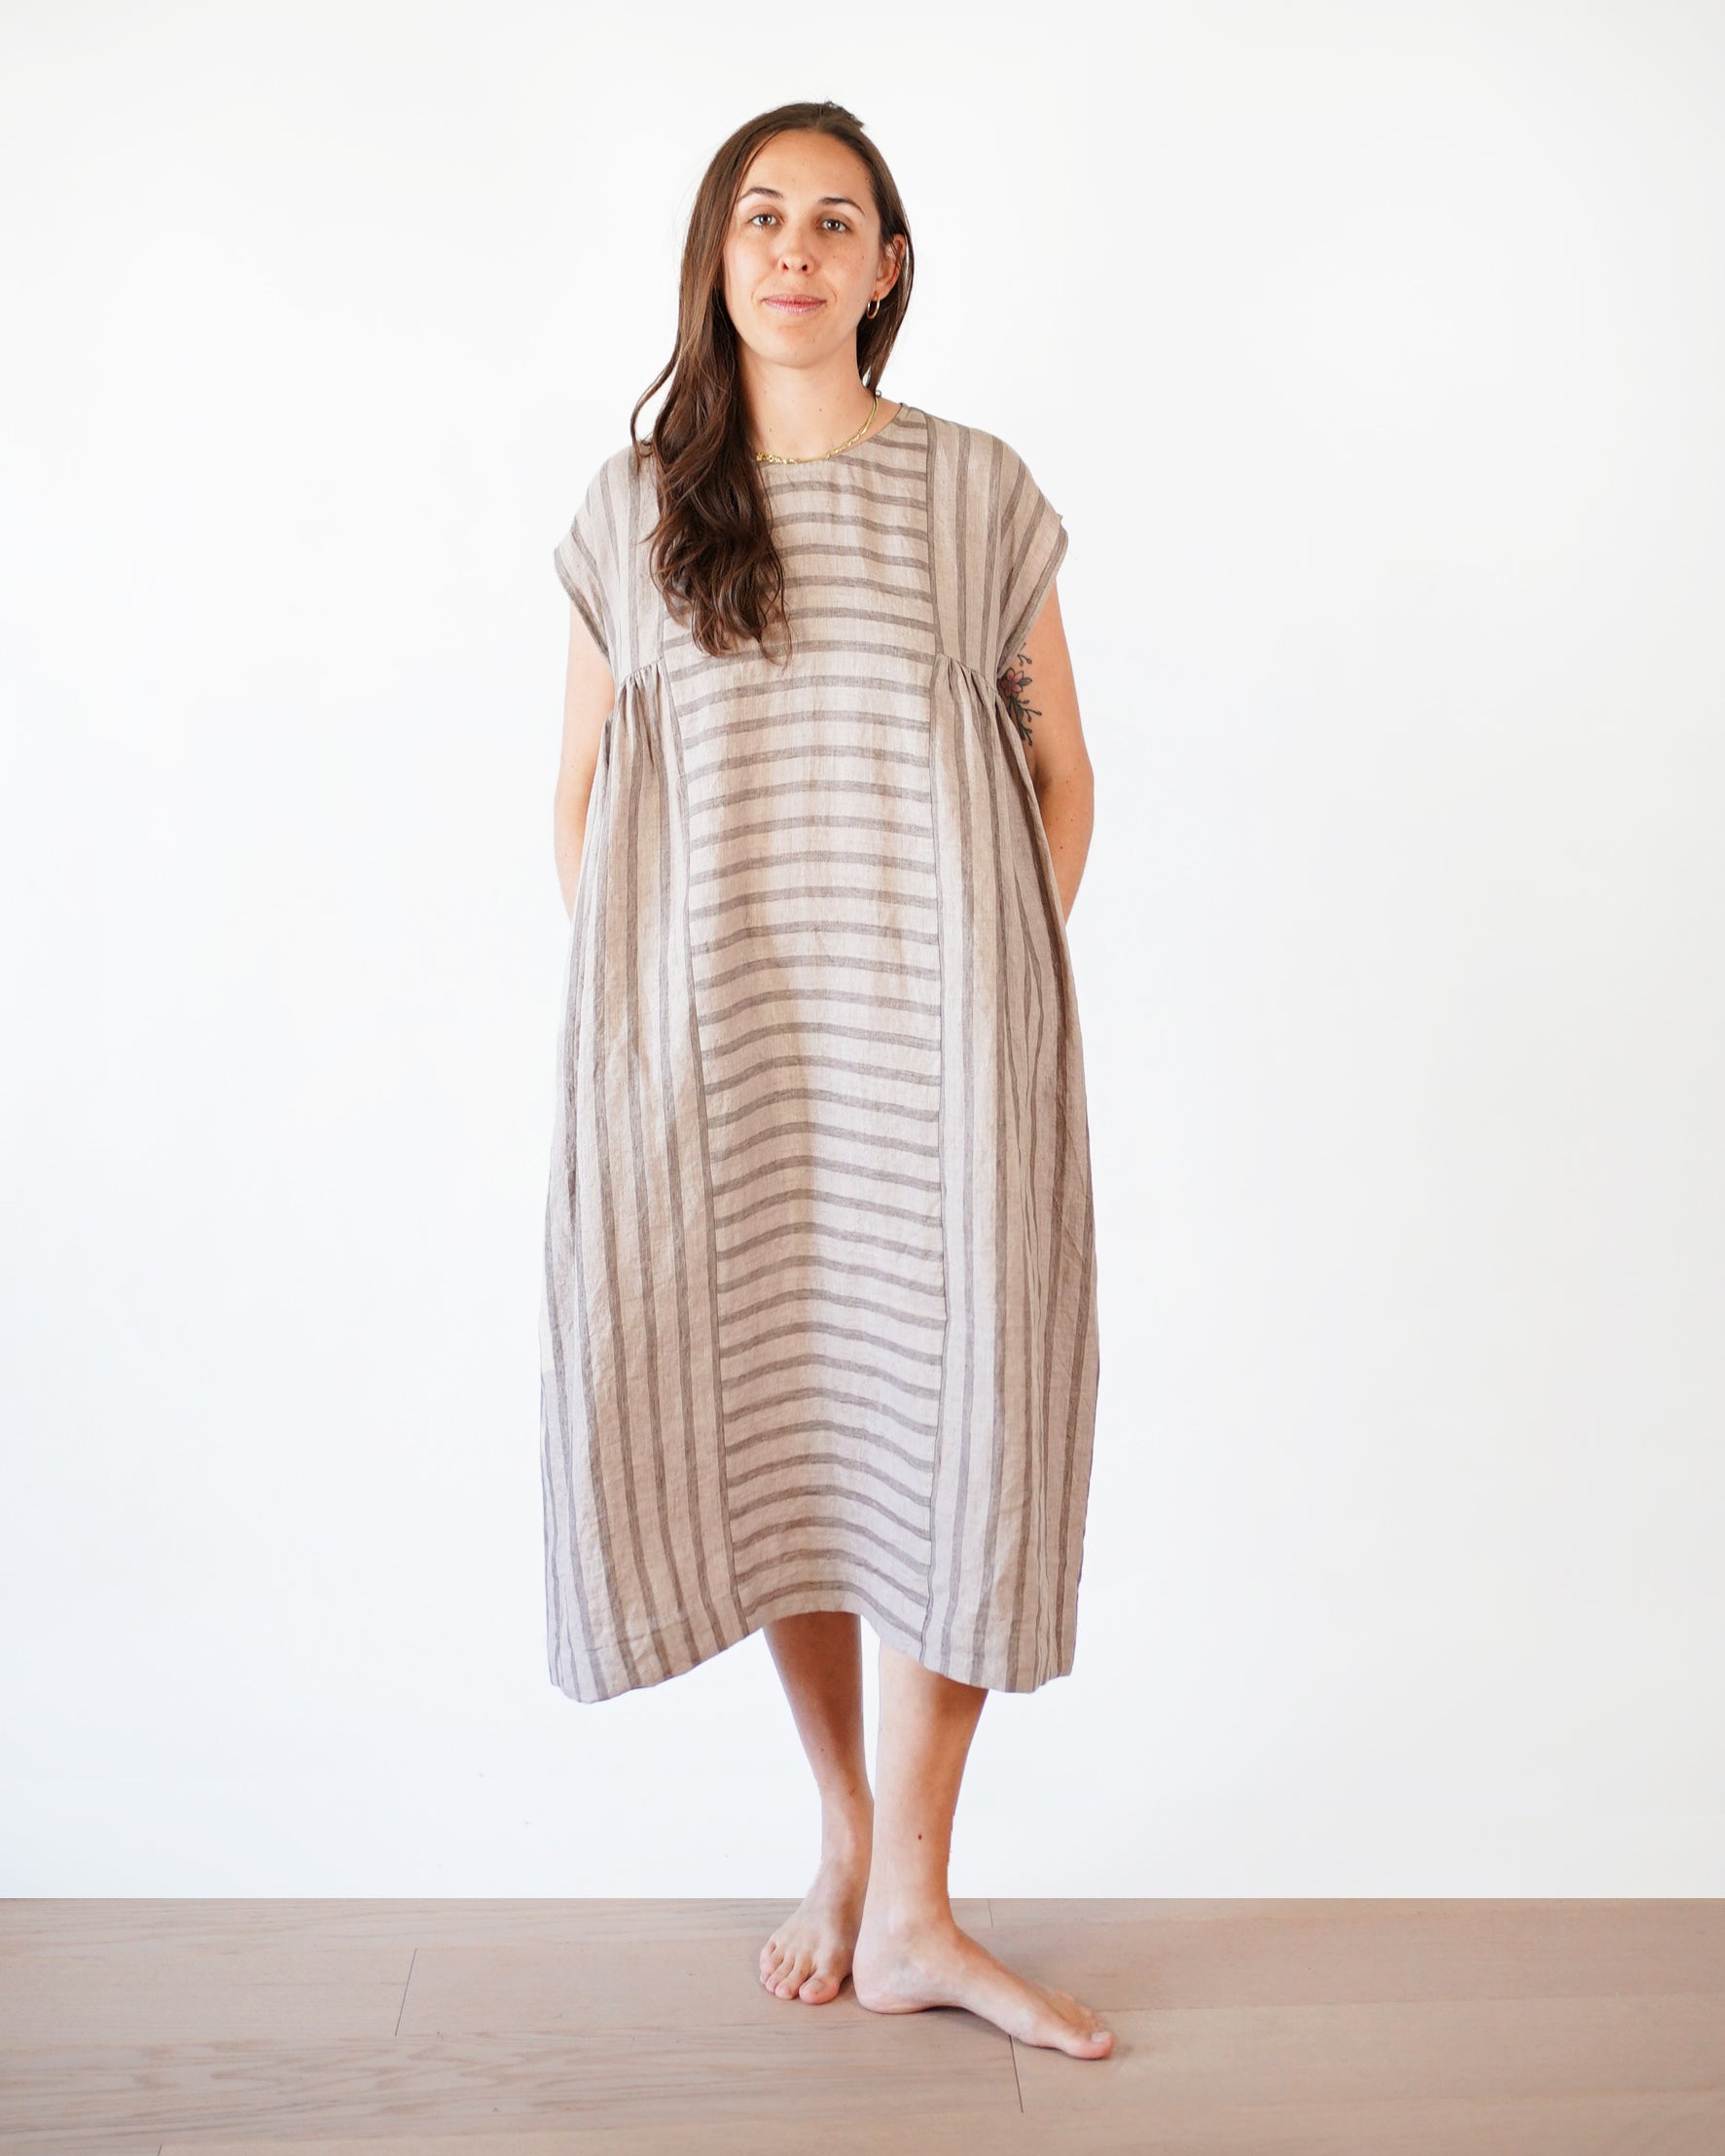 Woman wearing the Collage Gather Dress sewing pattern from Matchy Matchy on The Fold Line. A dress pattern made in light to medium weight woven fabrics, featuring a relaxed boxy fit, high waist with side gathers, in-seam pockets, midi length, round neckli